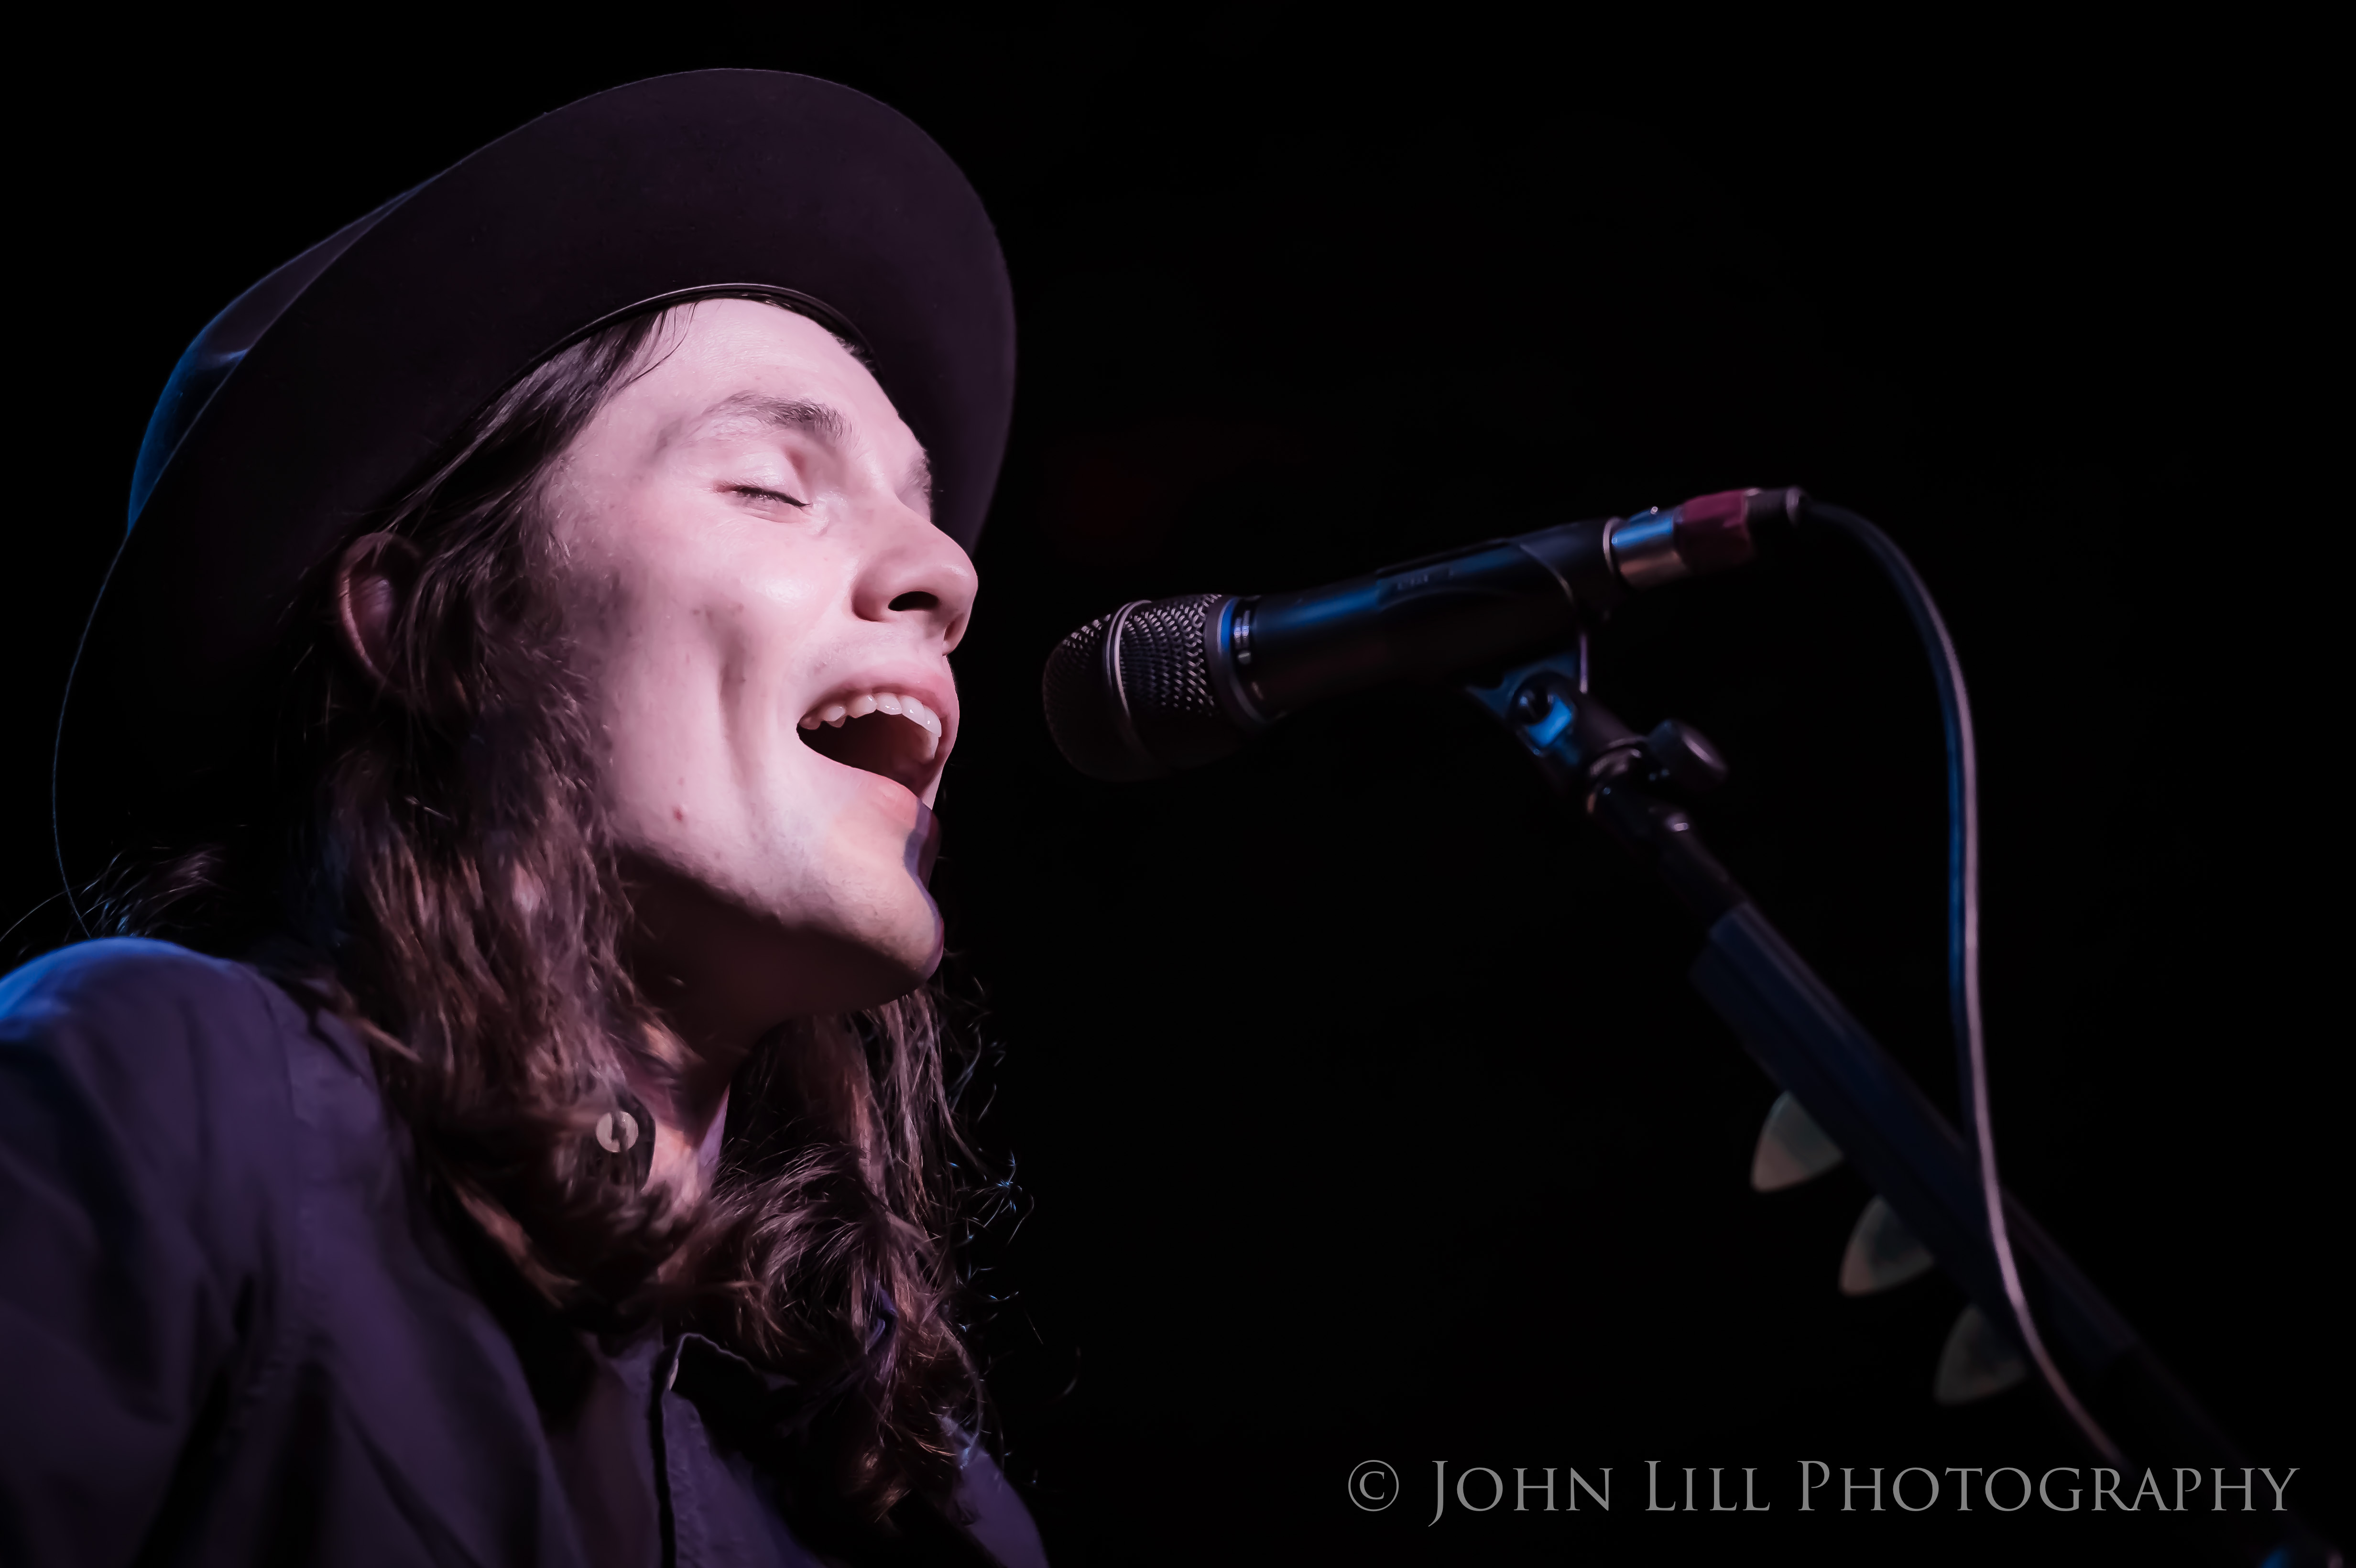 James Bay performs at the Showbox in Seattle. Photo by John Lill